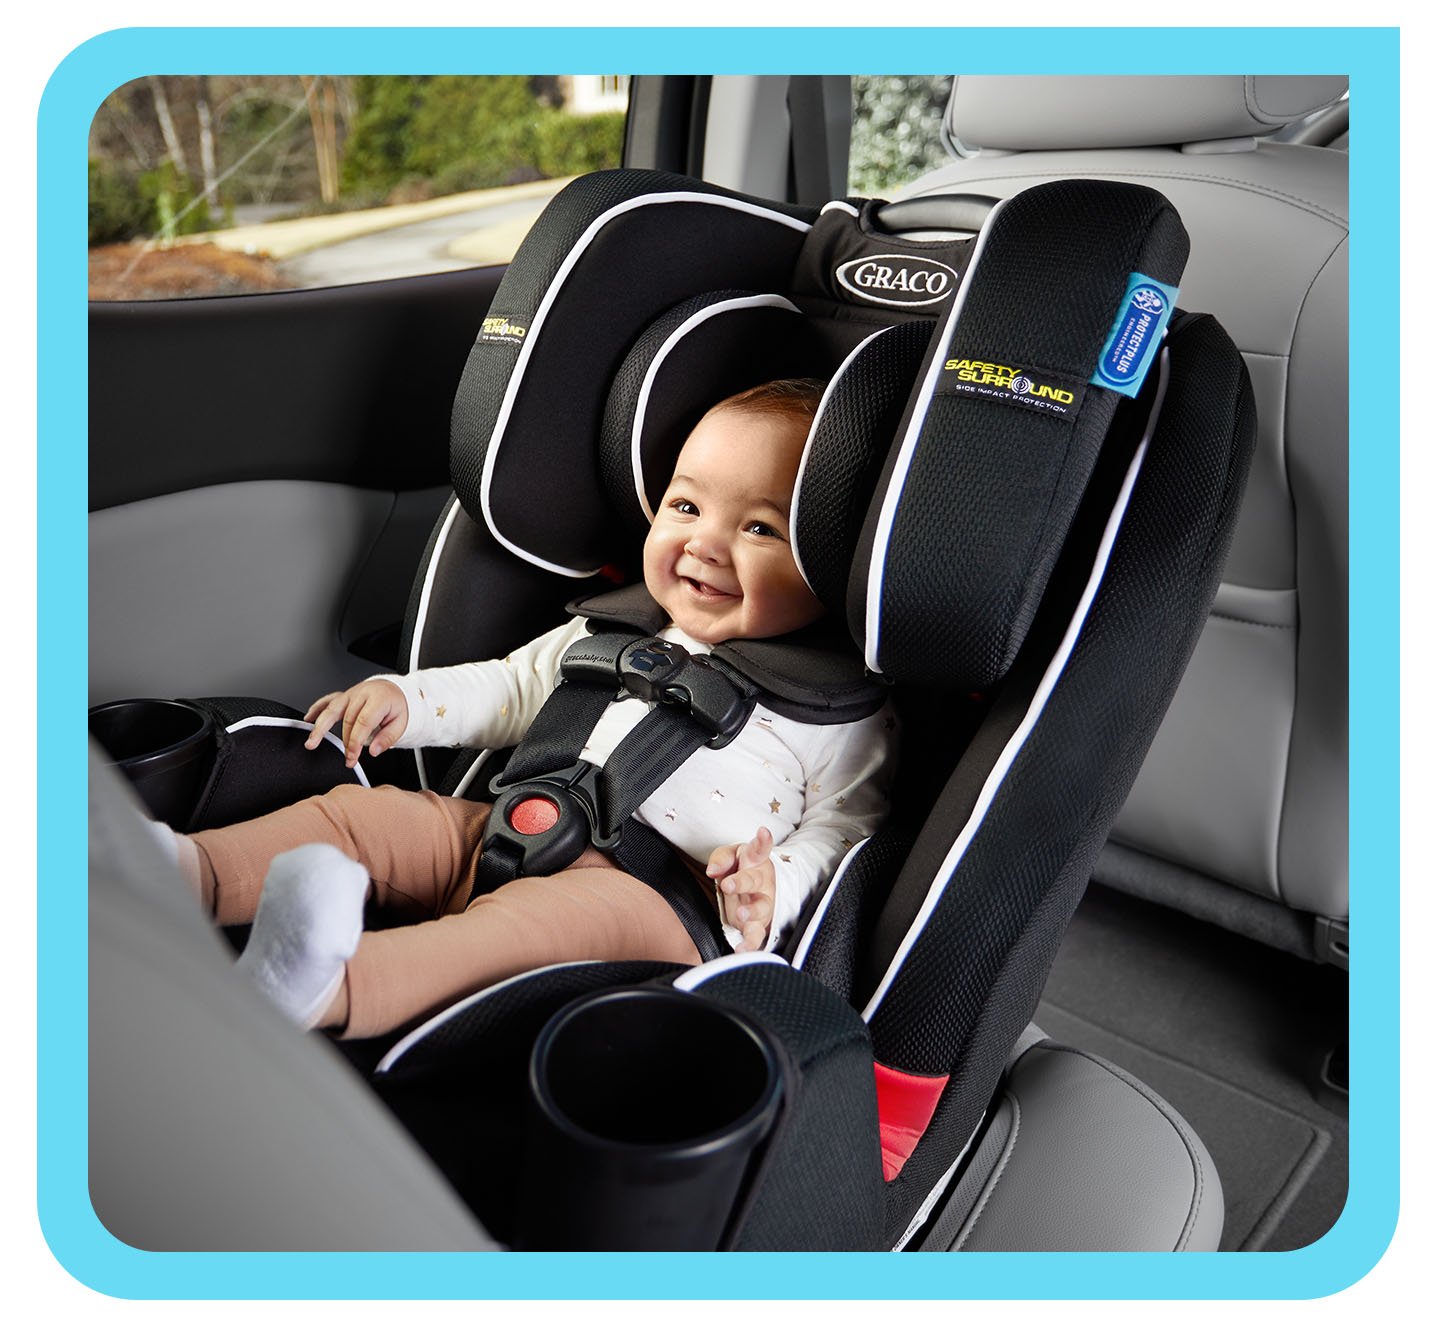 Graco S Car Seat Safety Standards, When Should I Change The Infant Car Seat